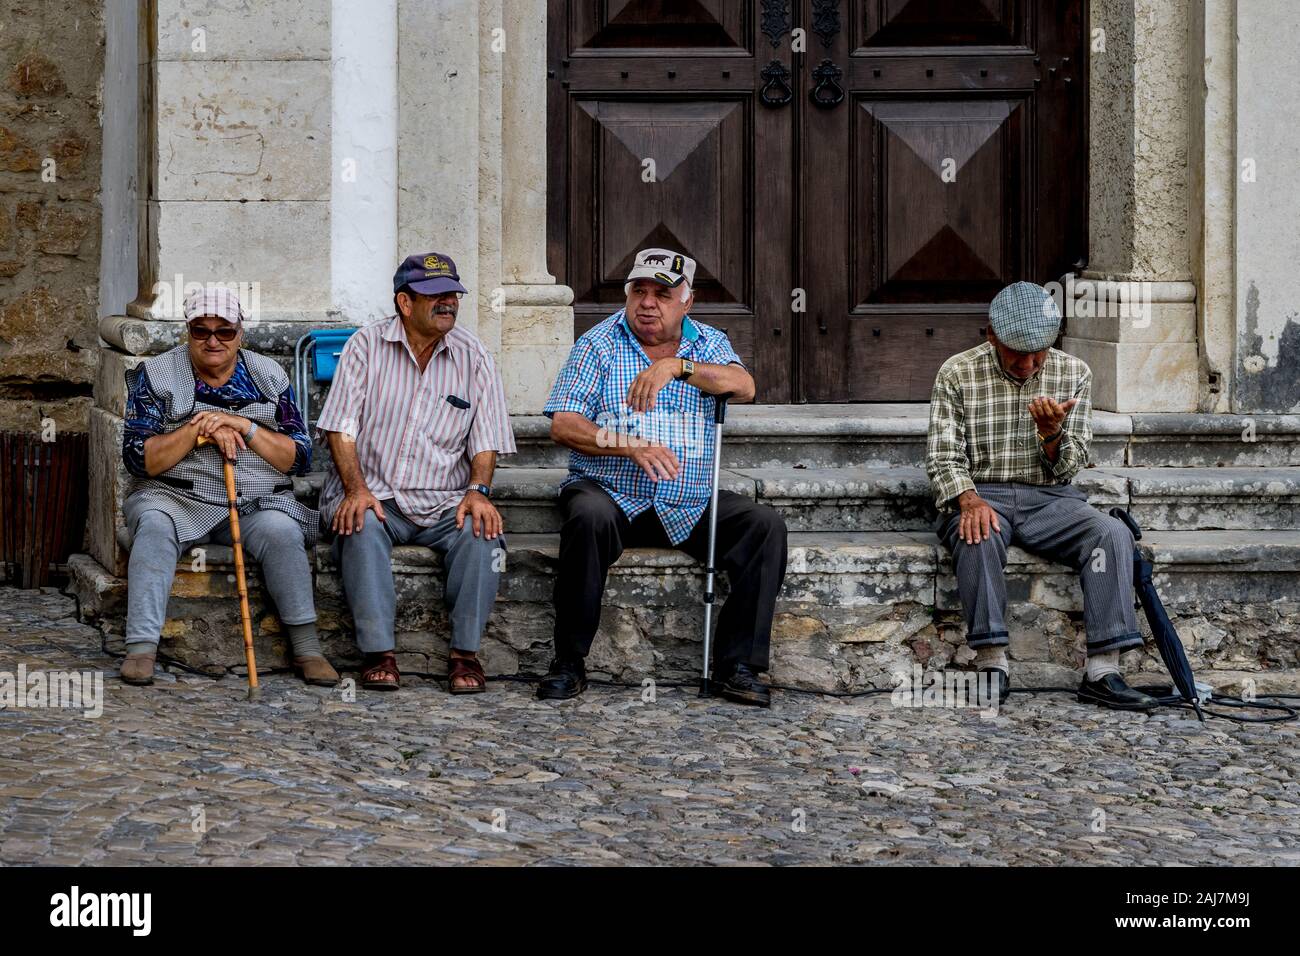 Elderly men hanging out as friends sitting on the steps infant of the entrance of an old building in Obidos, Portugal. Photograph: Iris de Reus Stock Photo